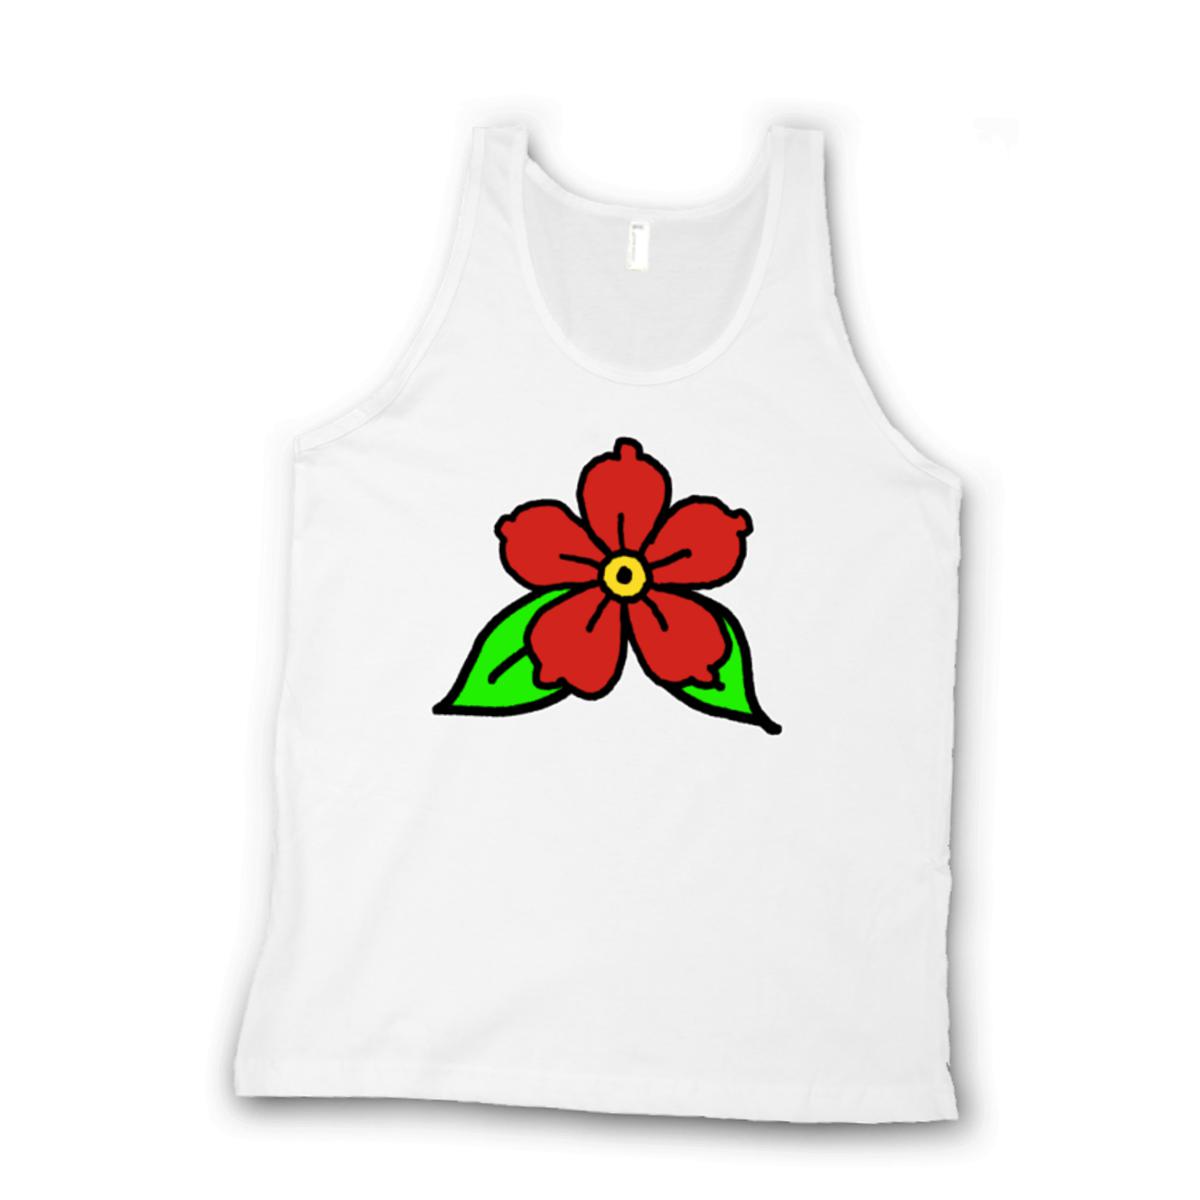 American Traditional Flower Unisex Tank Top Small white